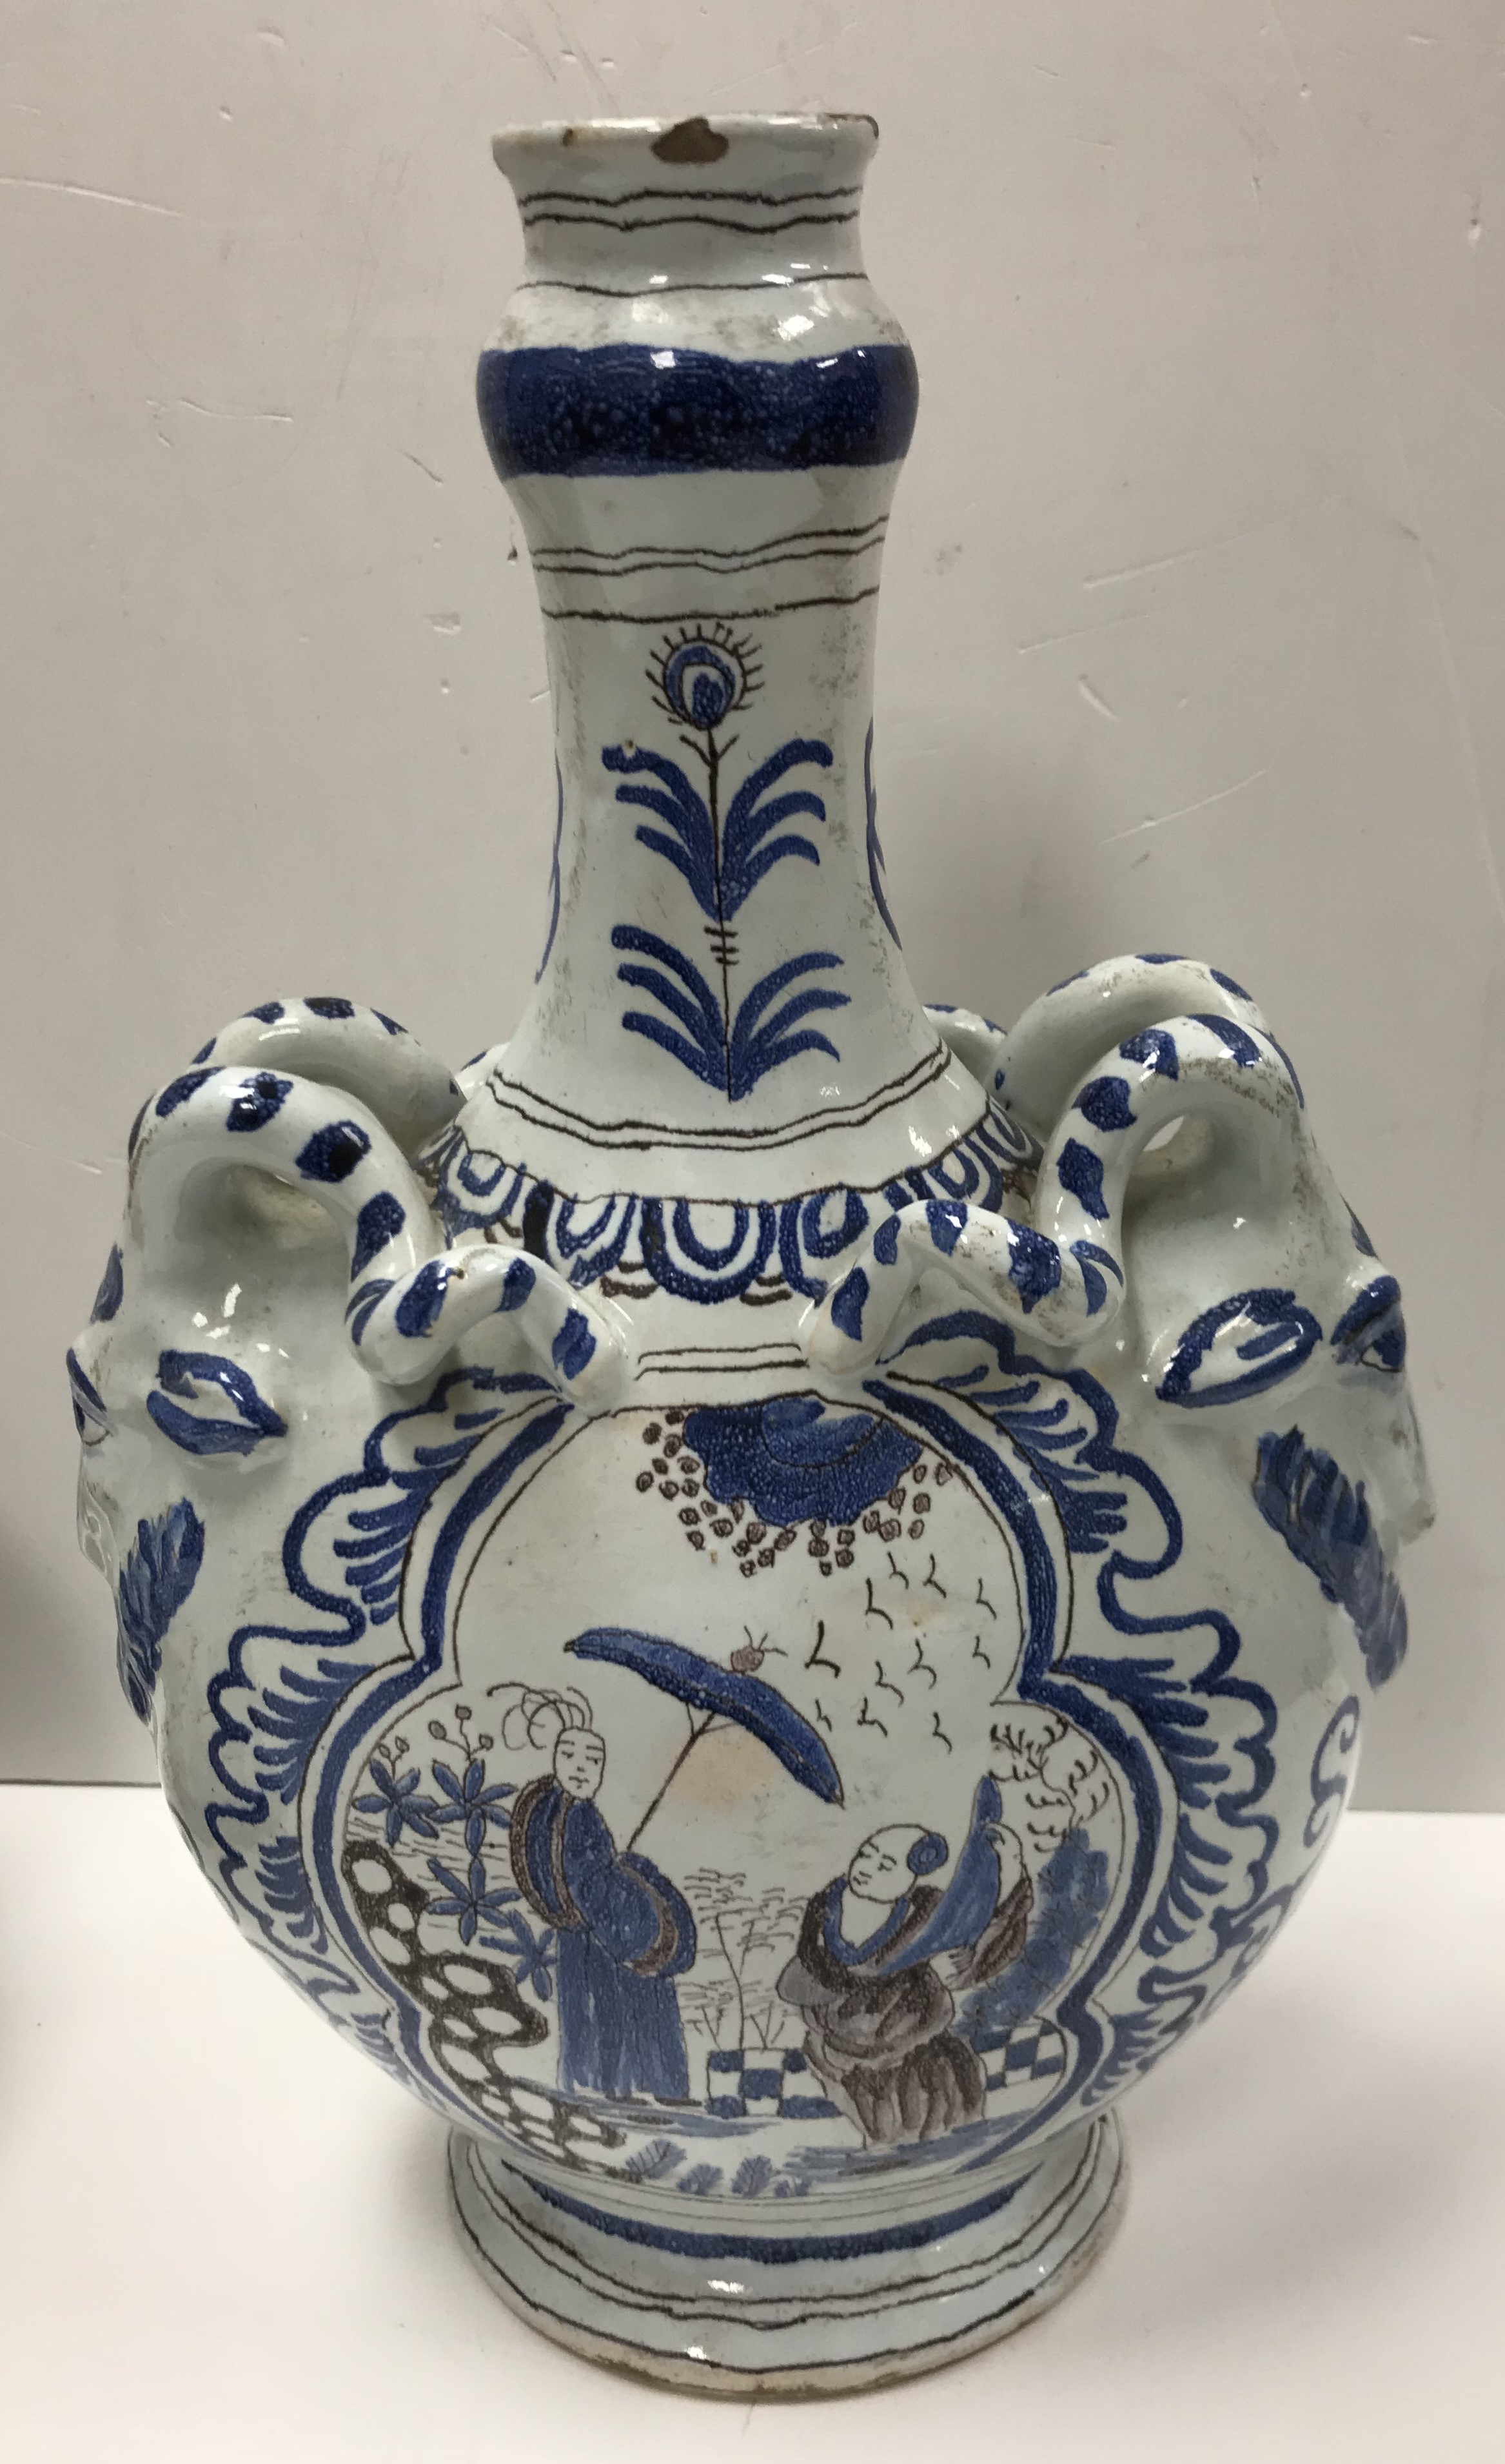 A 19th Century Dutch Delft faience ware vase in the chinoiserie taste with goats head handles and - Image 2 of 3